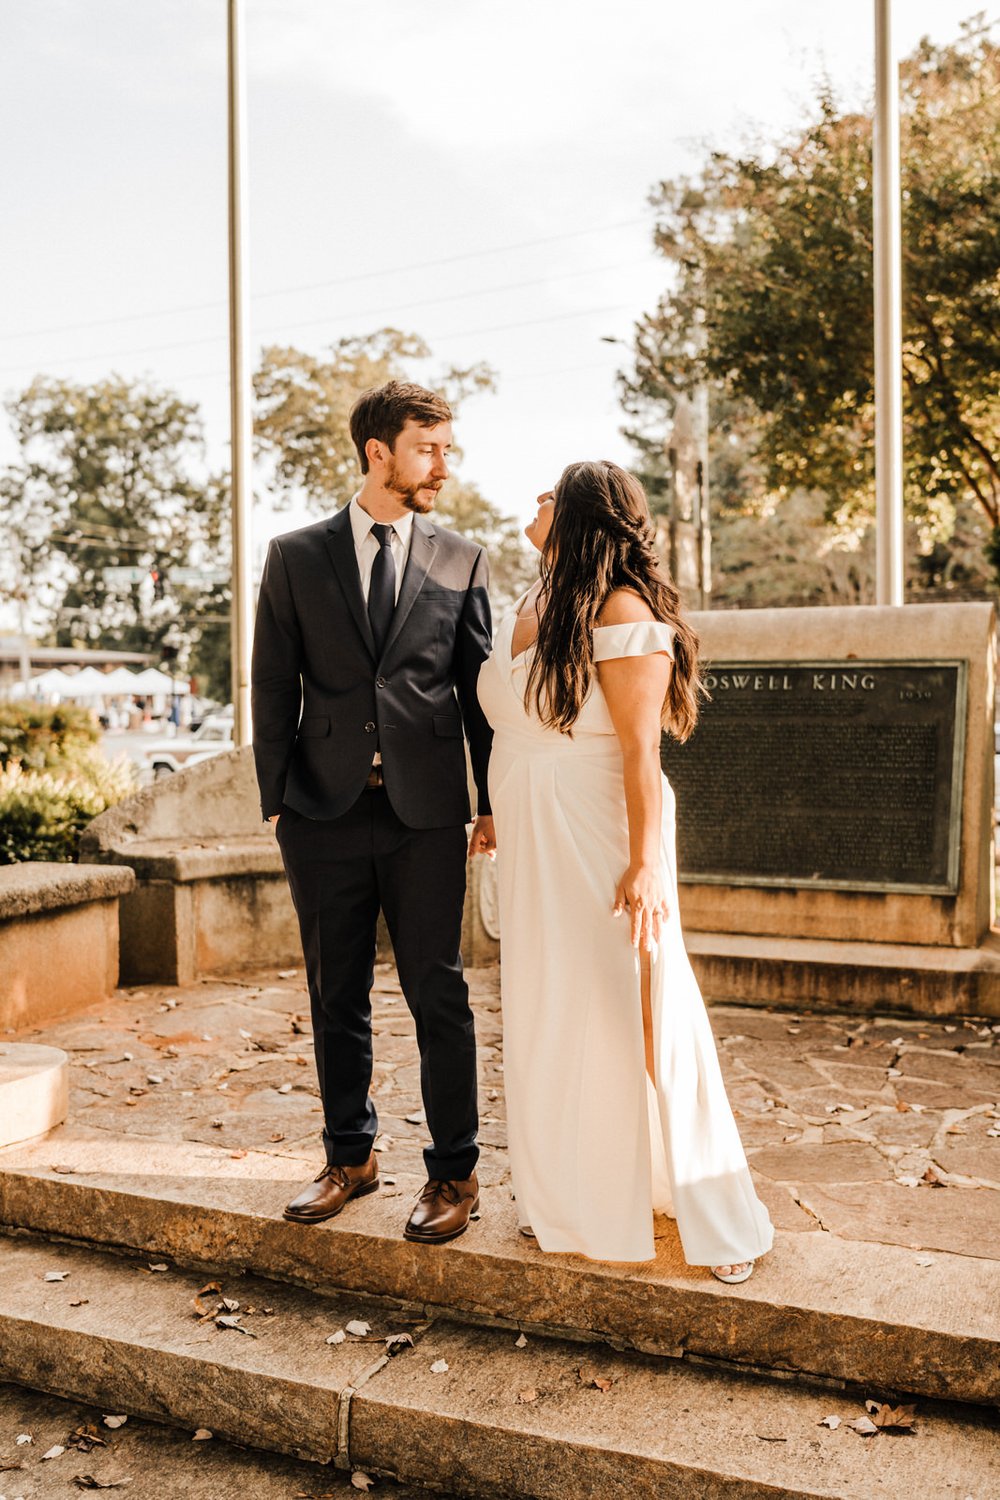 Warm-Moody-Bride-and-Groom-Photos-at-Roswell-Georgia-Town-Square (6).jpg